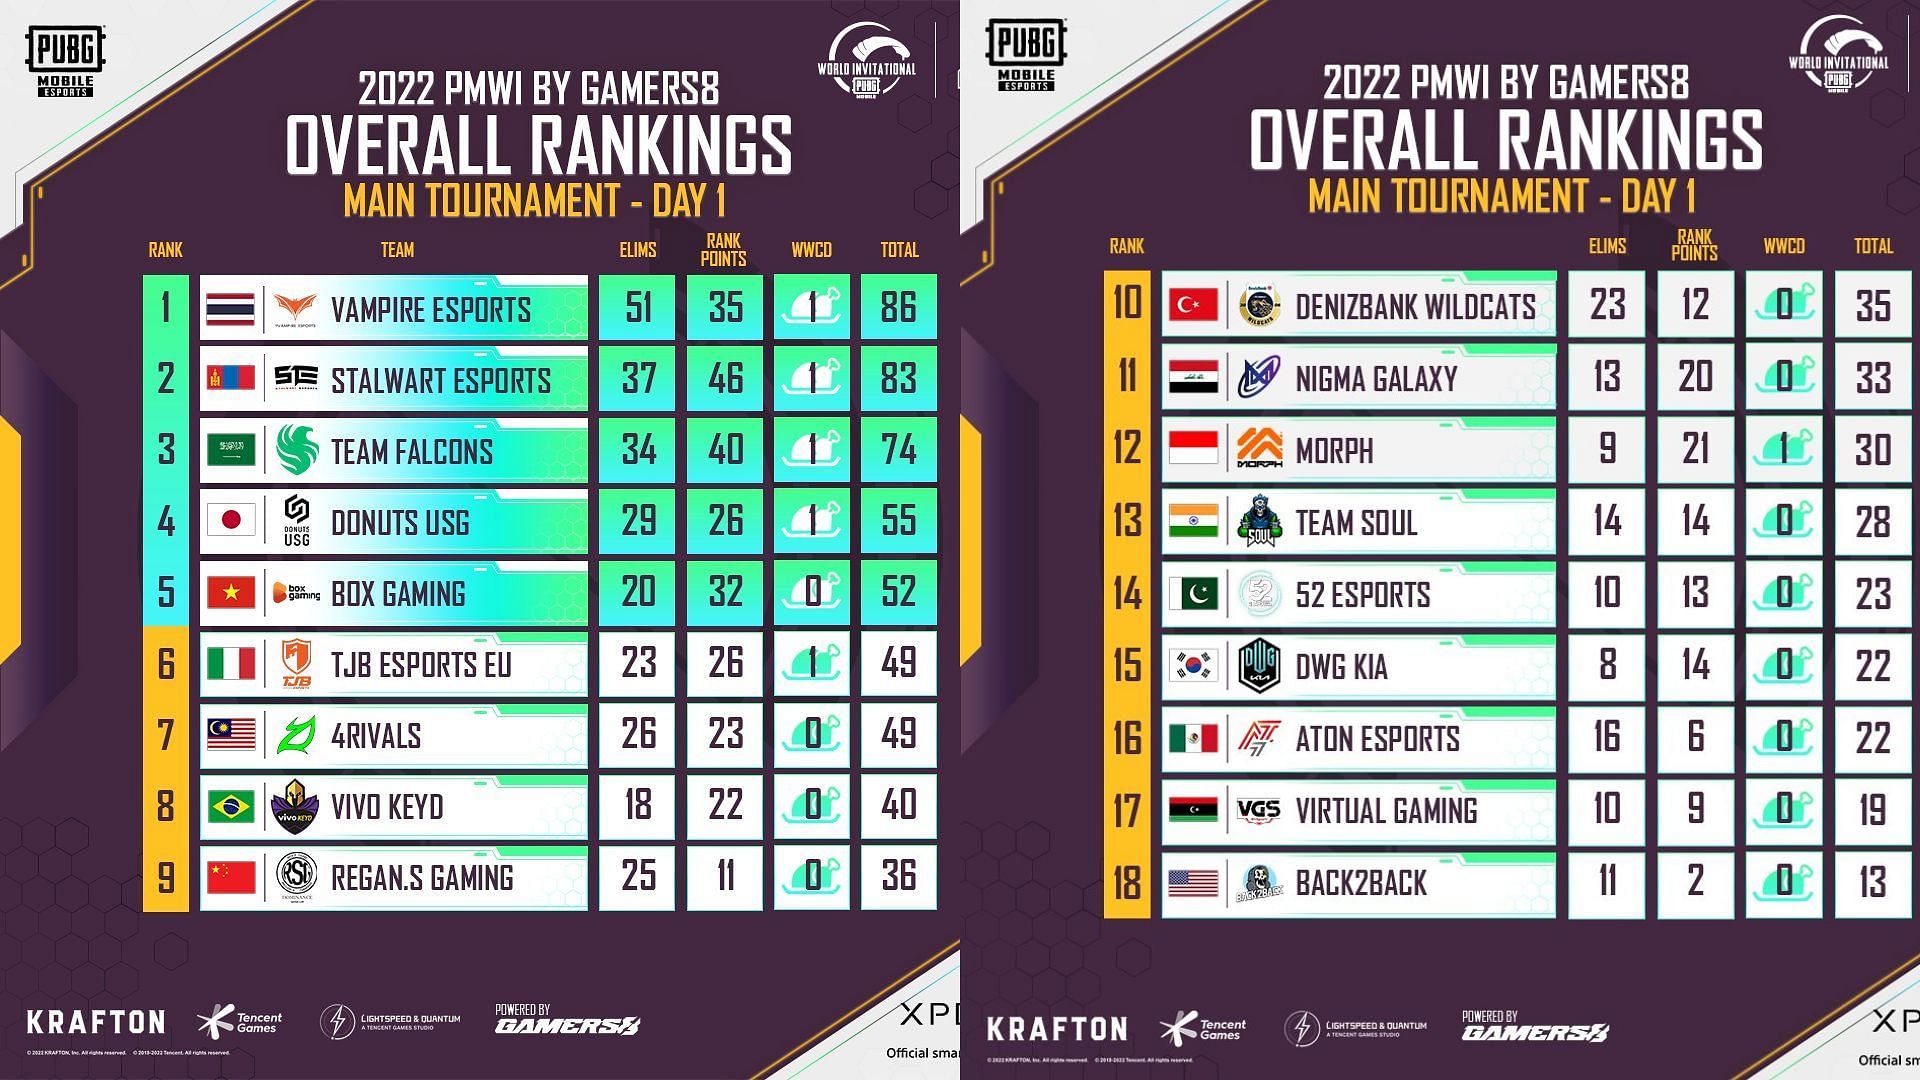 Team SouL placed 13th with 28 points after PMWI Day 1 (Image via PUBG Mobile)